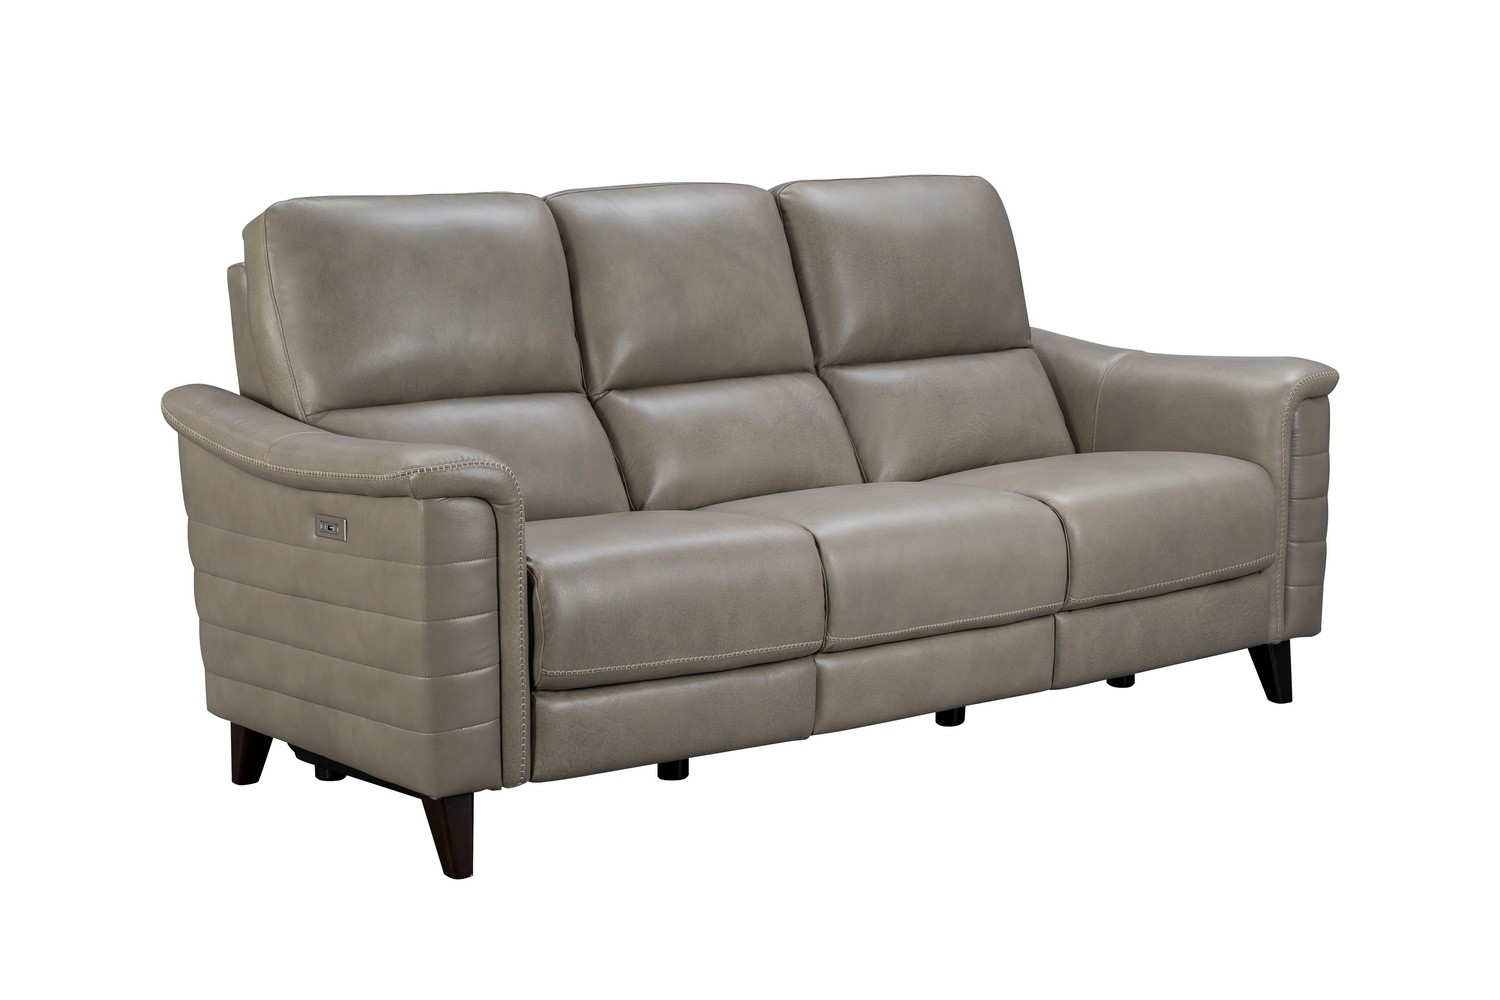 Barcalounger Malone Power Reclining Sofa with Power Head Rests - Sergi Gray Beige/Leather Match